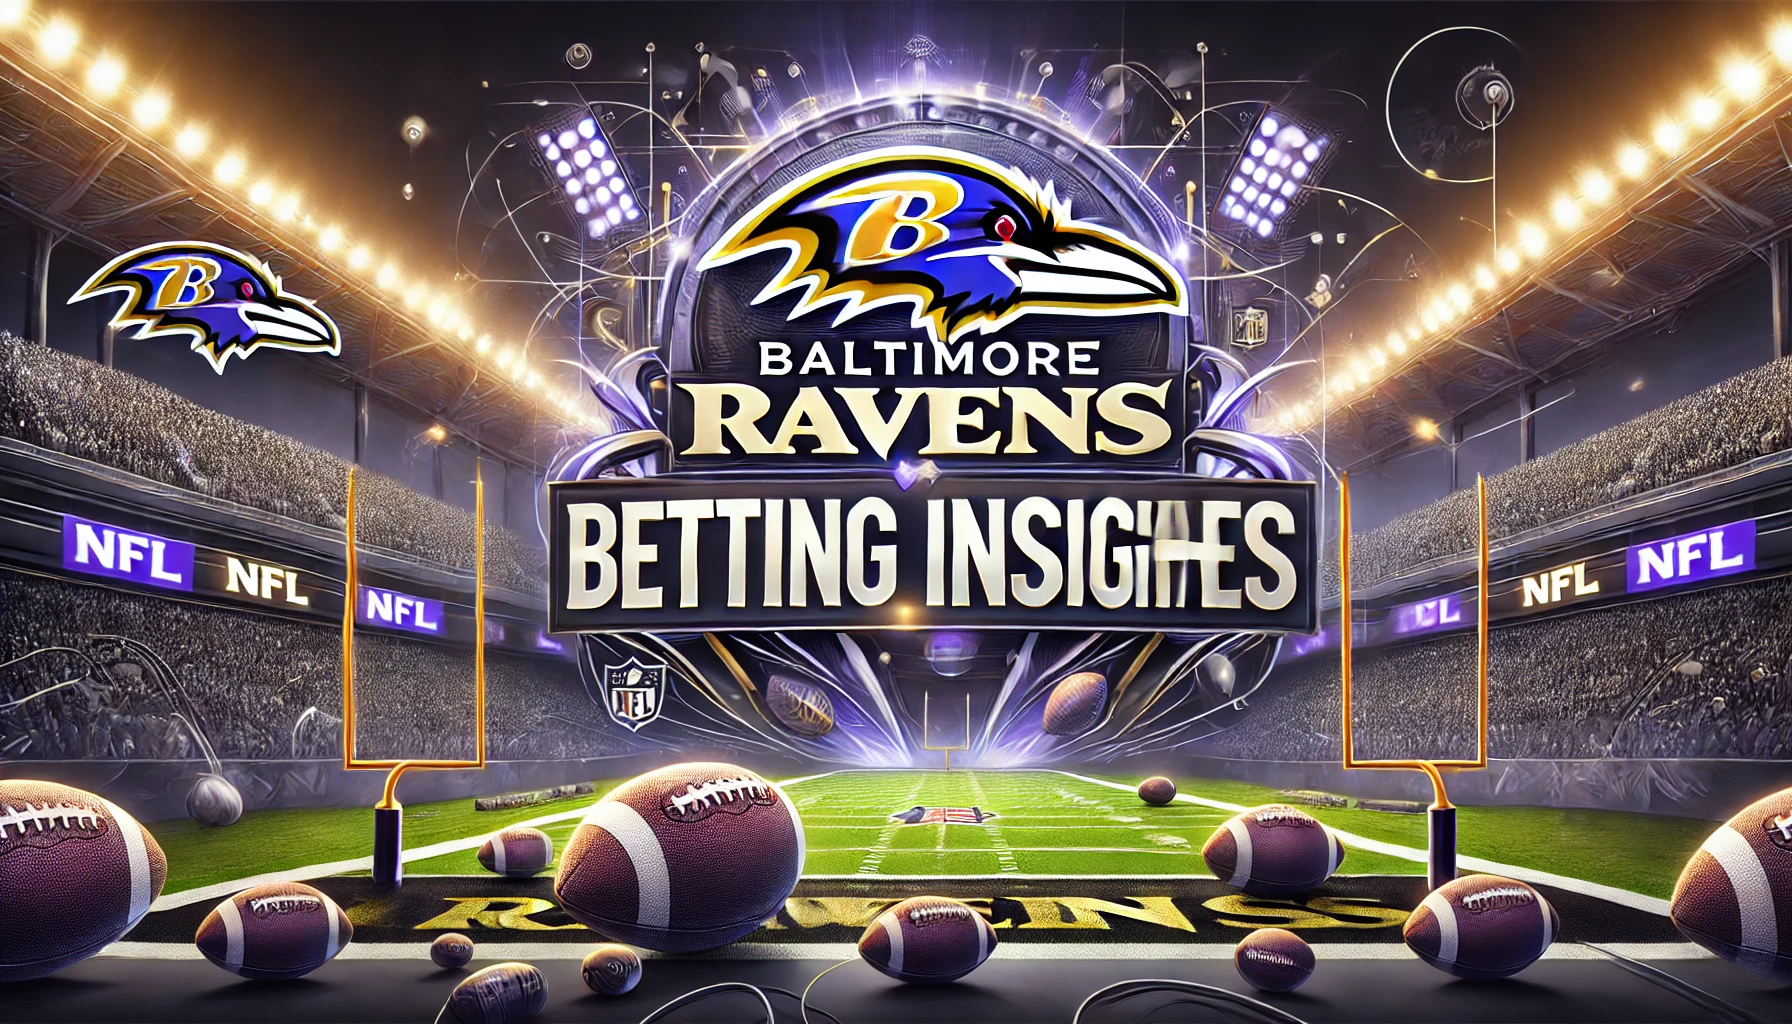 Analyzing the Baltimore Ravens' Home Performance for NFL Bettors